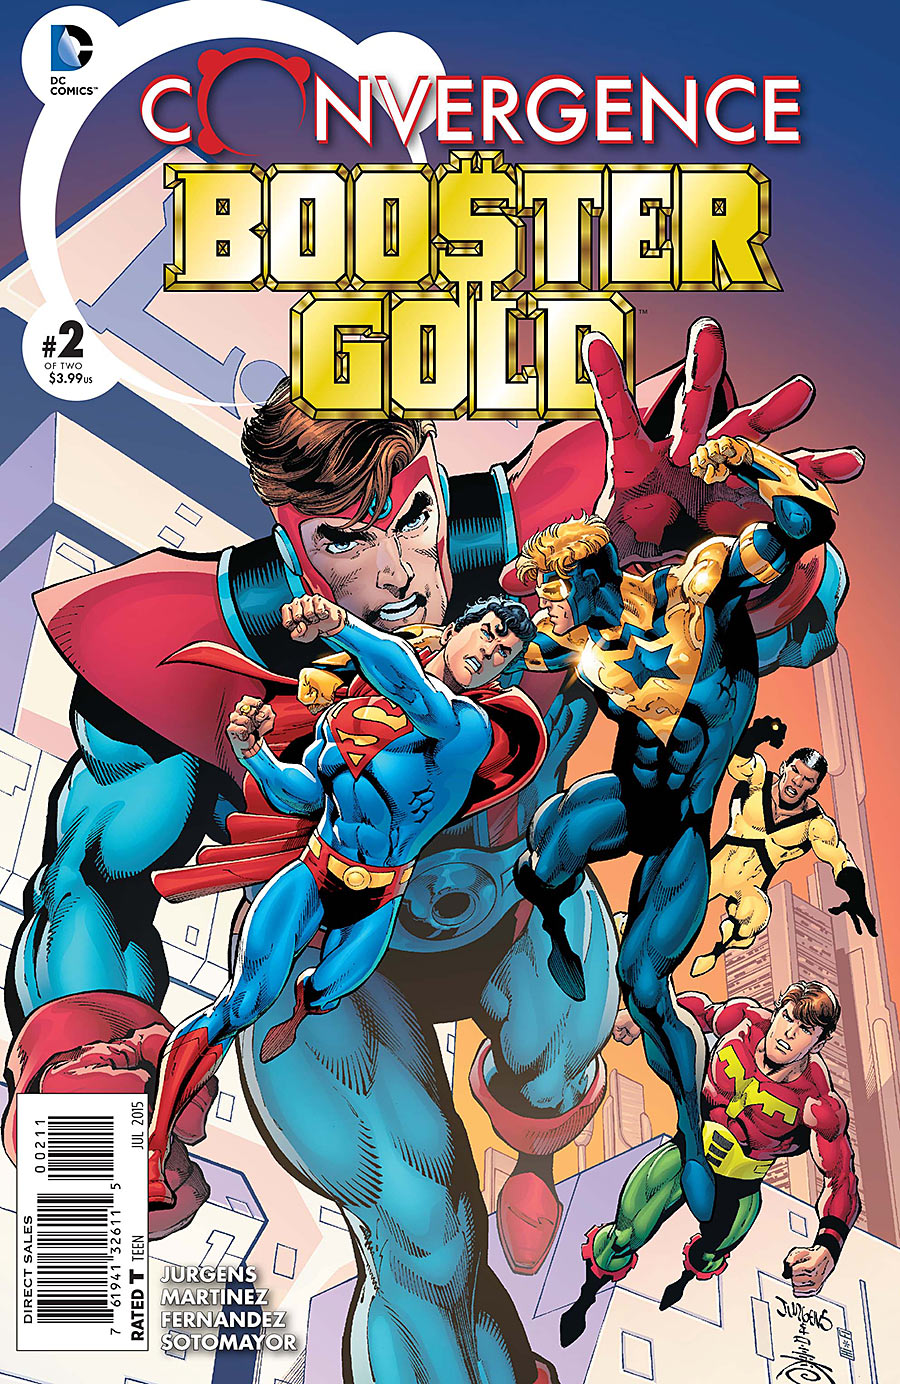 Convergence: Booster Gold Vol. 1 #2